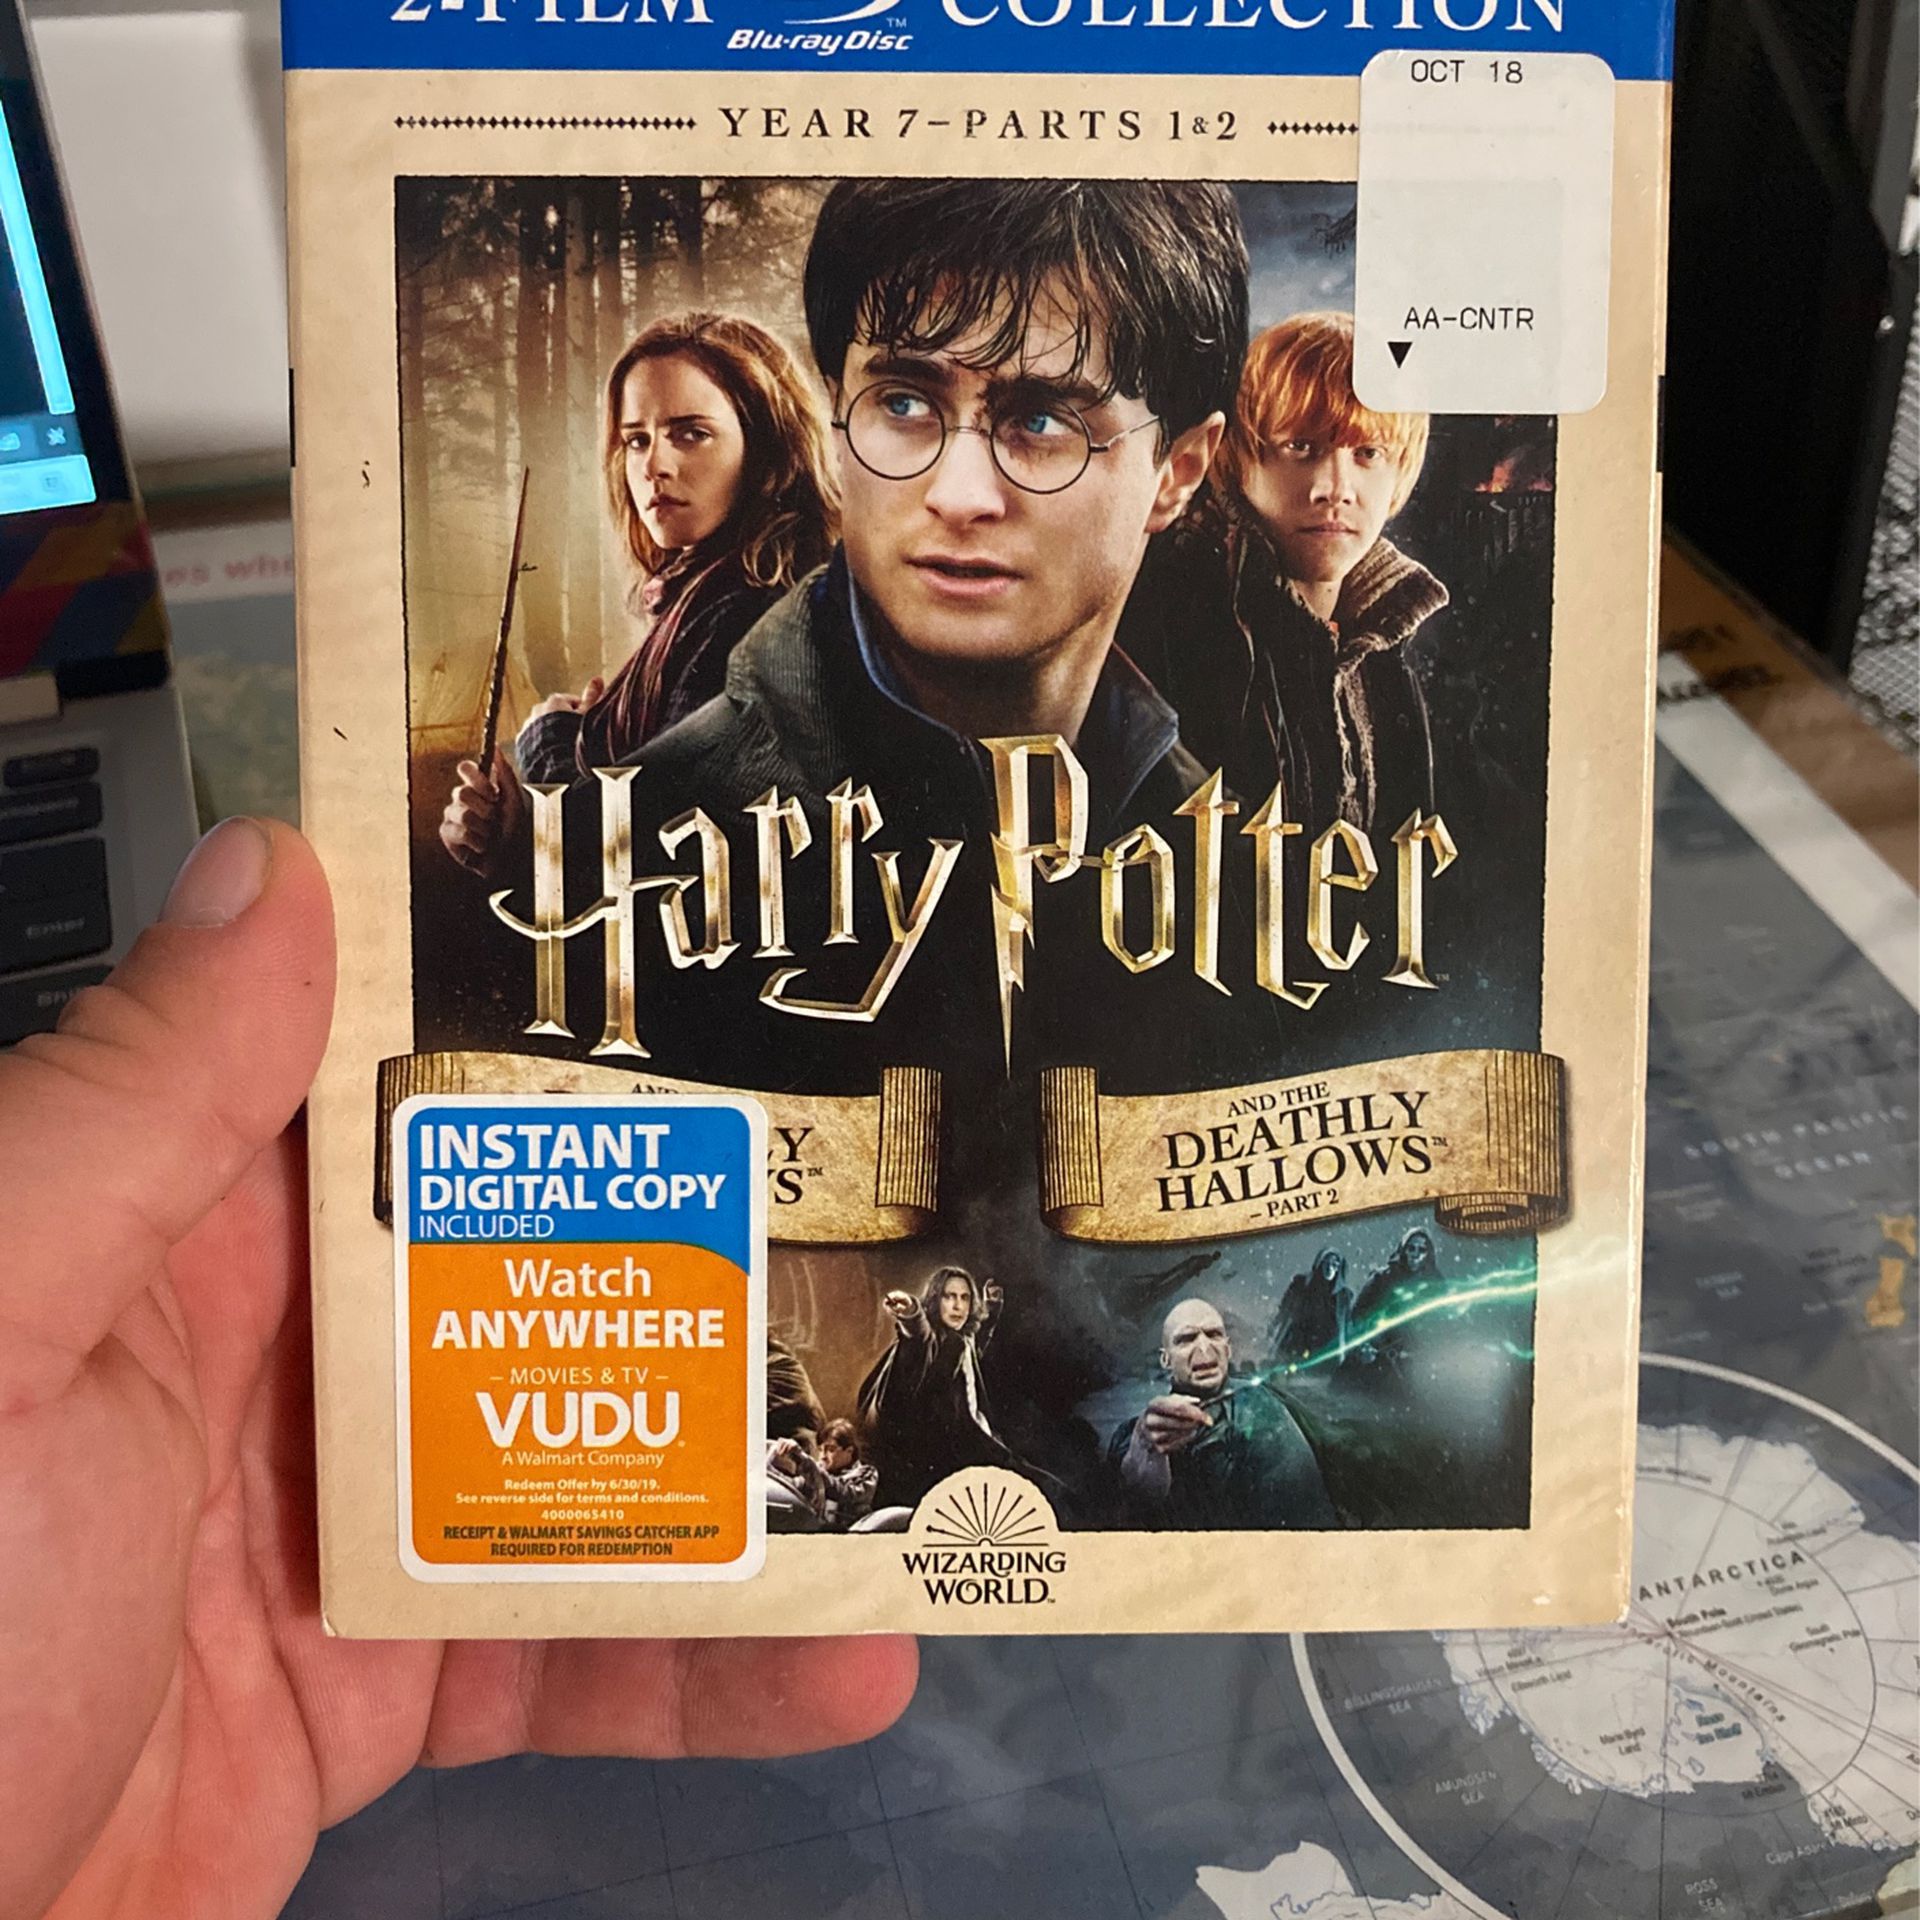 Harry Potter Deathly Hallows Blu-Ray